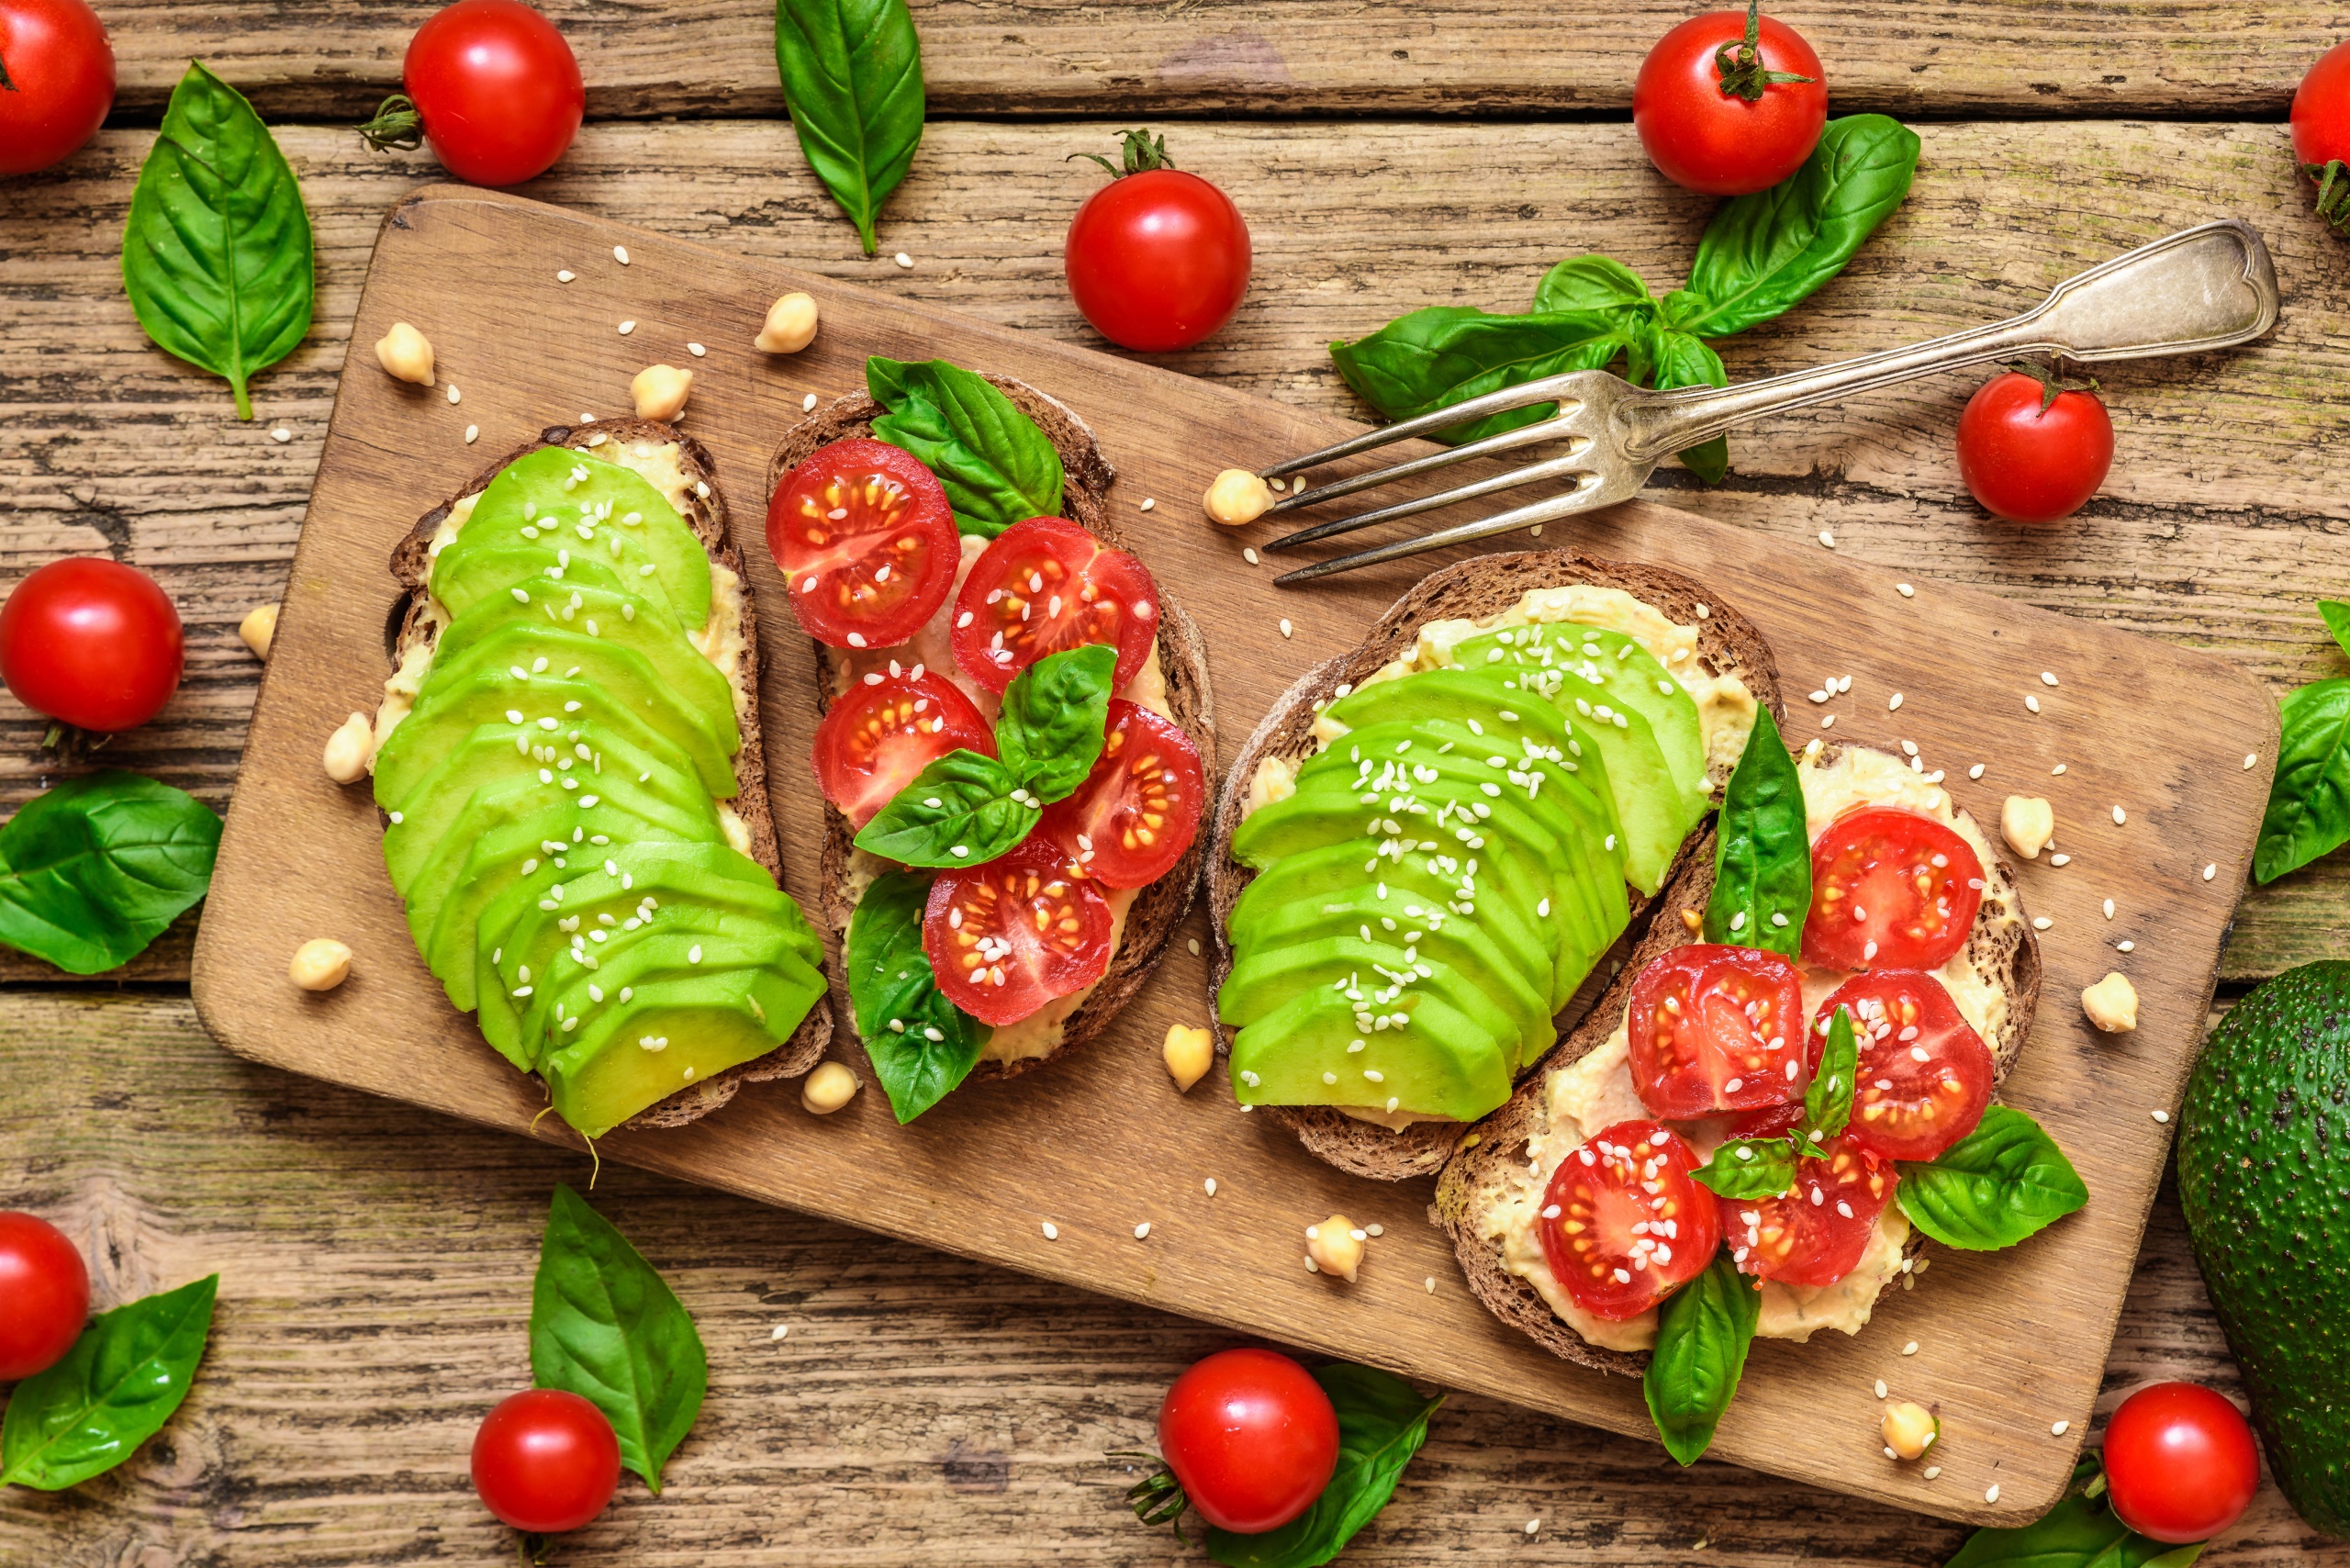 General 2560x1708 food bread fork tomatoes wooden surface cutting board toasts Avocado basil closeup